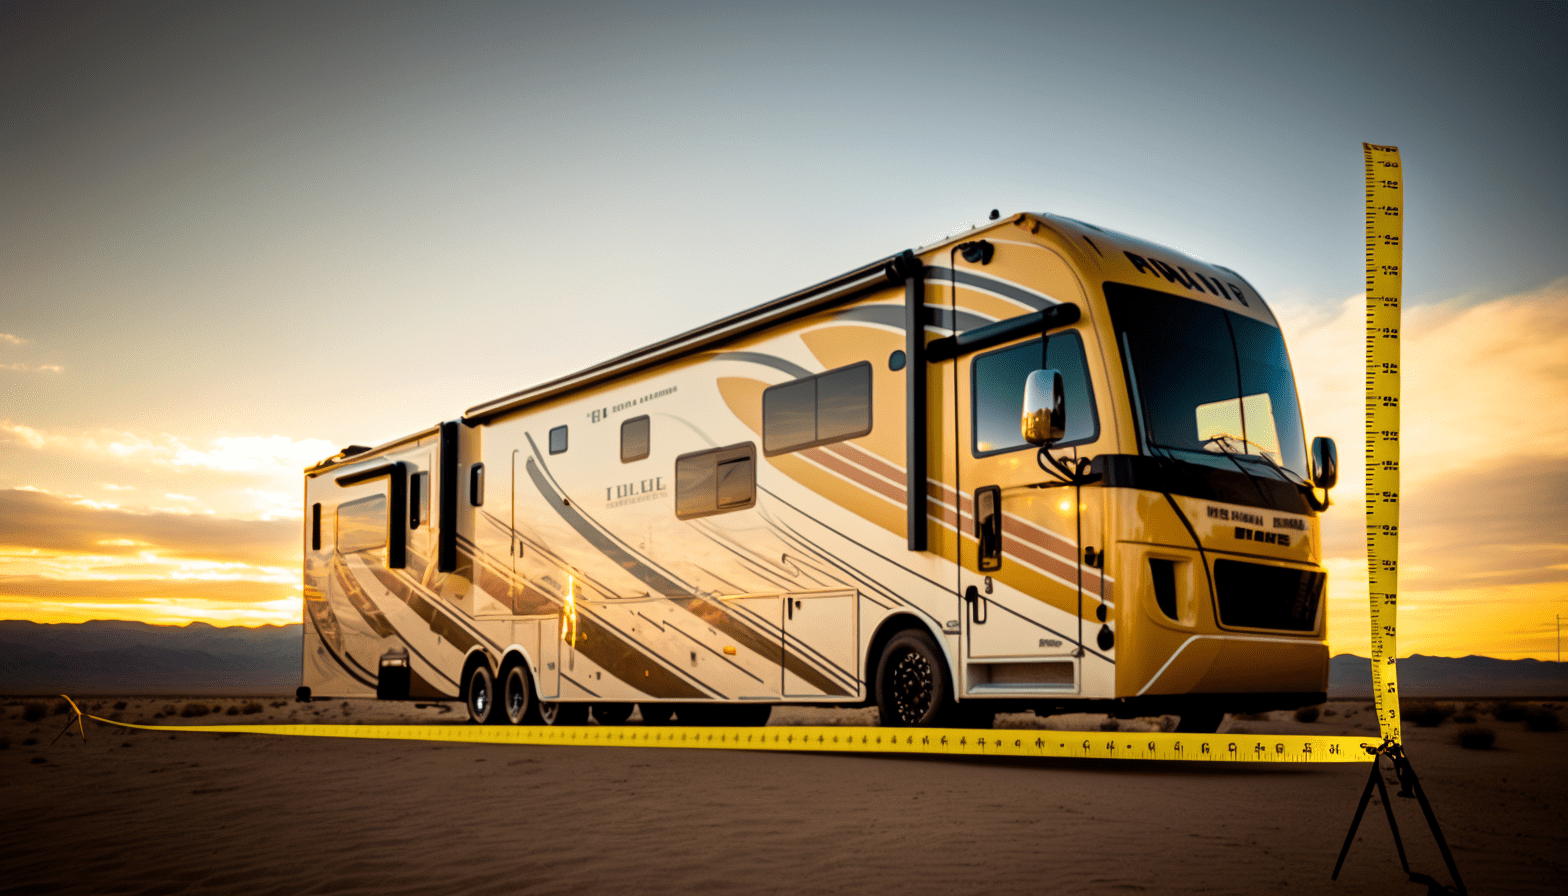 How Wide Is An RV?